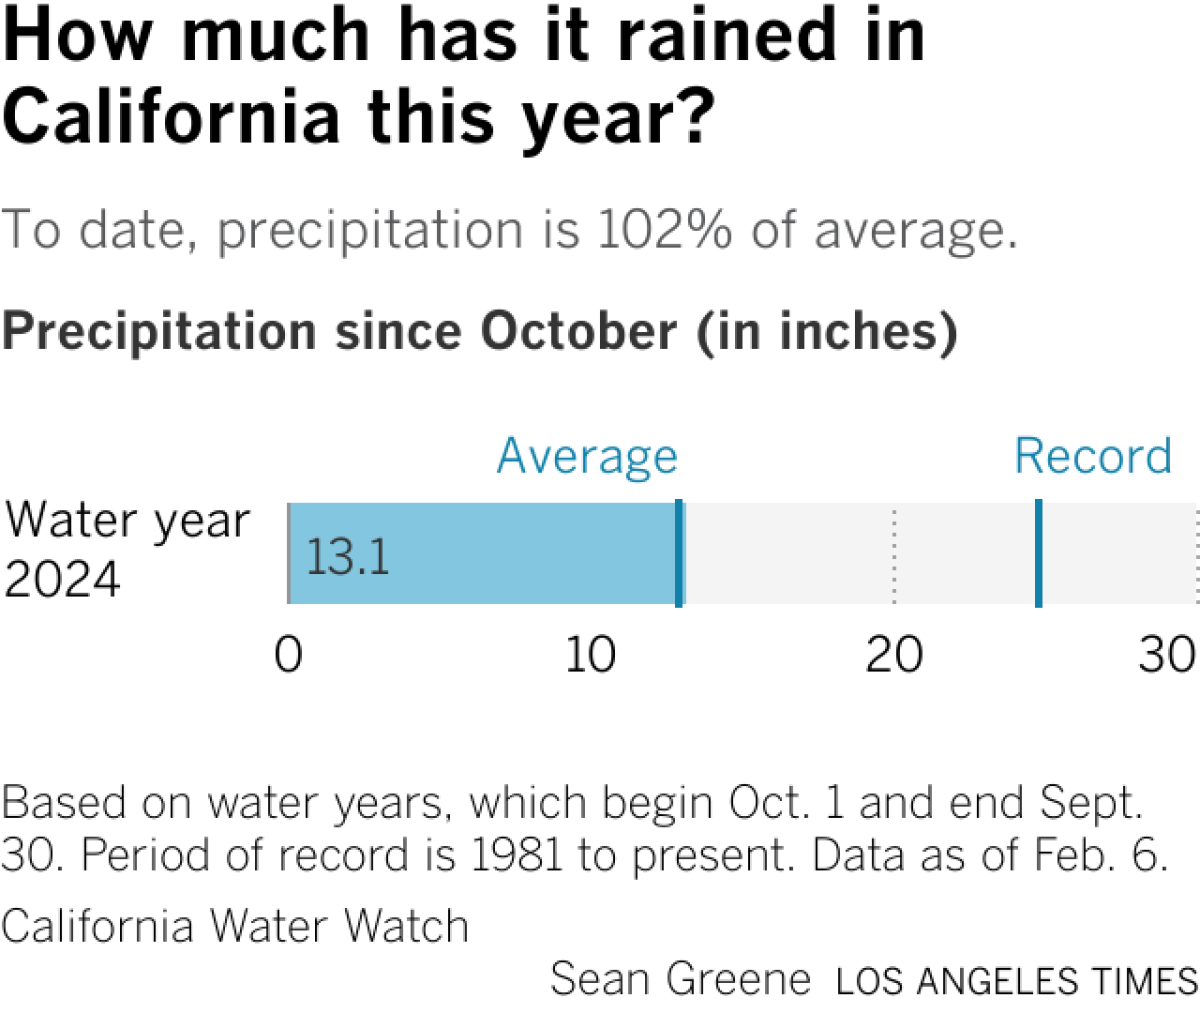 California has received 13.1 inches of rain so far this year, compared with an historical average of 12.9.